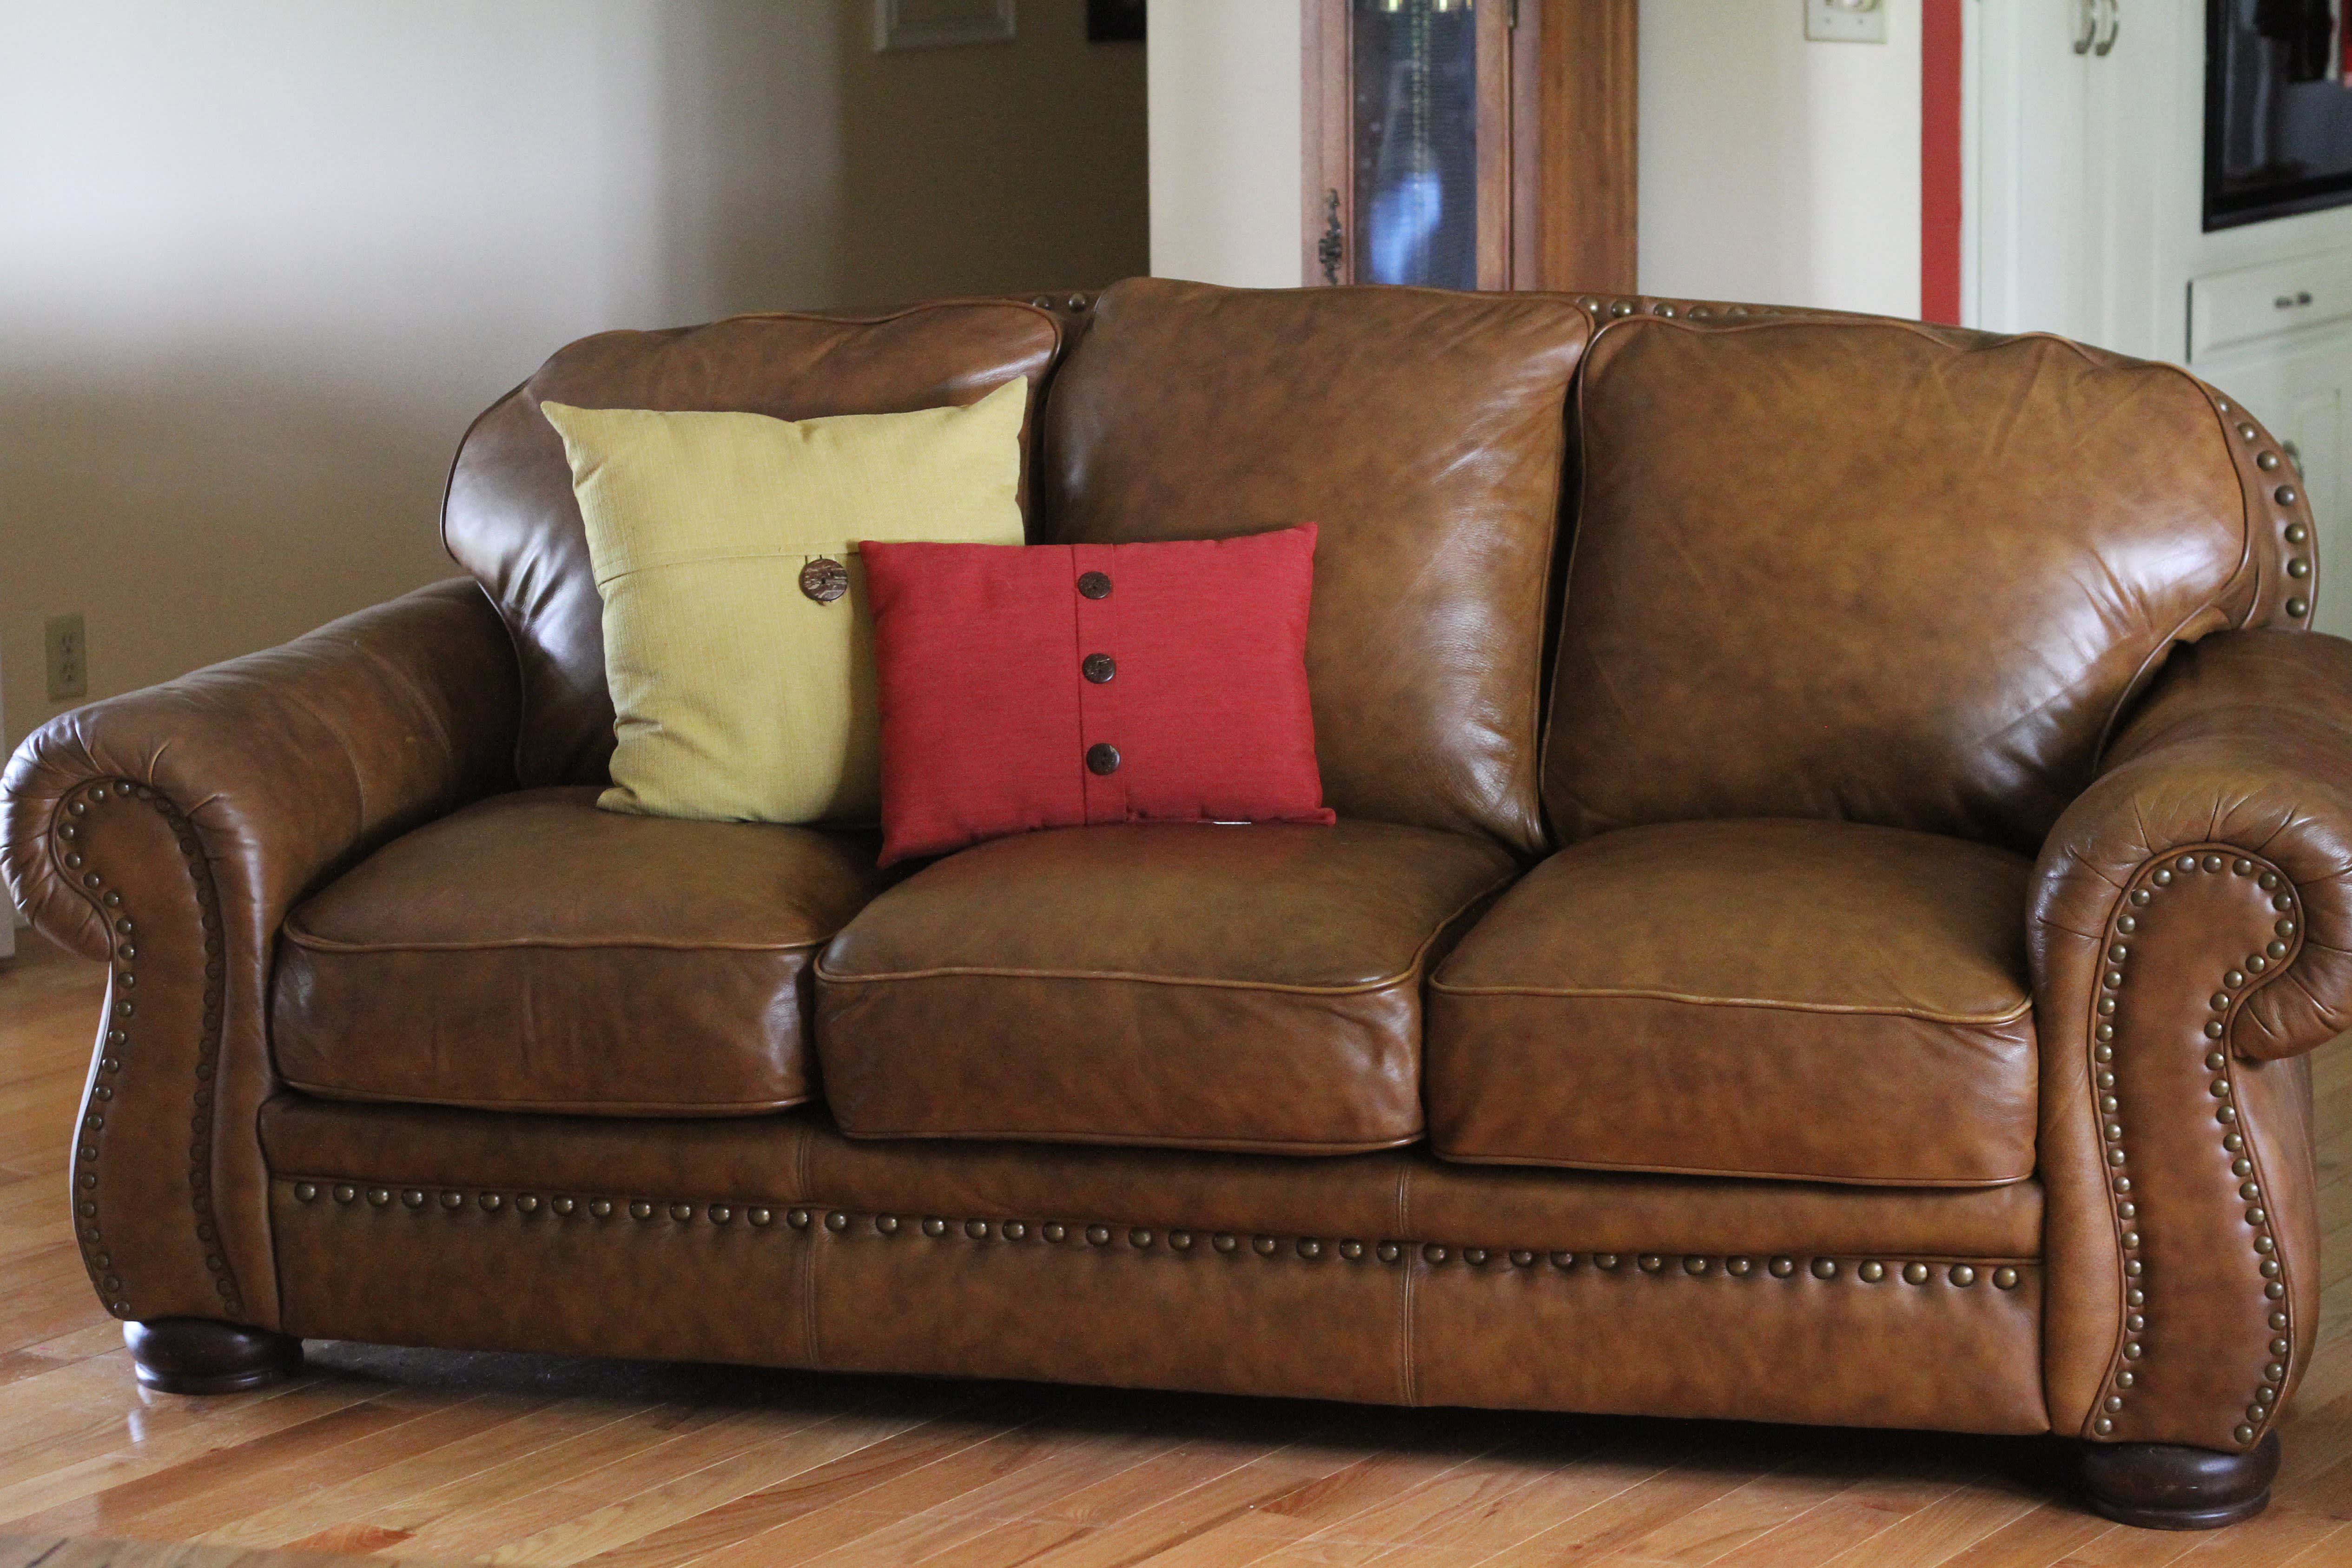 Stuffing Your Old Couch Cushions To Make Them Look New Again